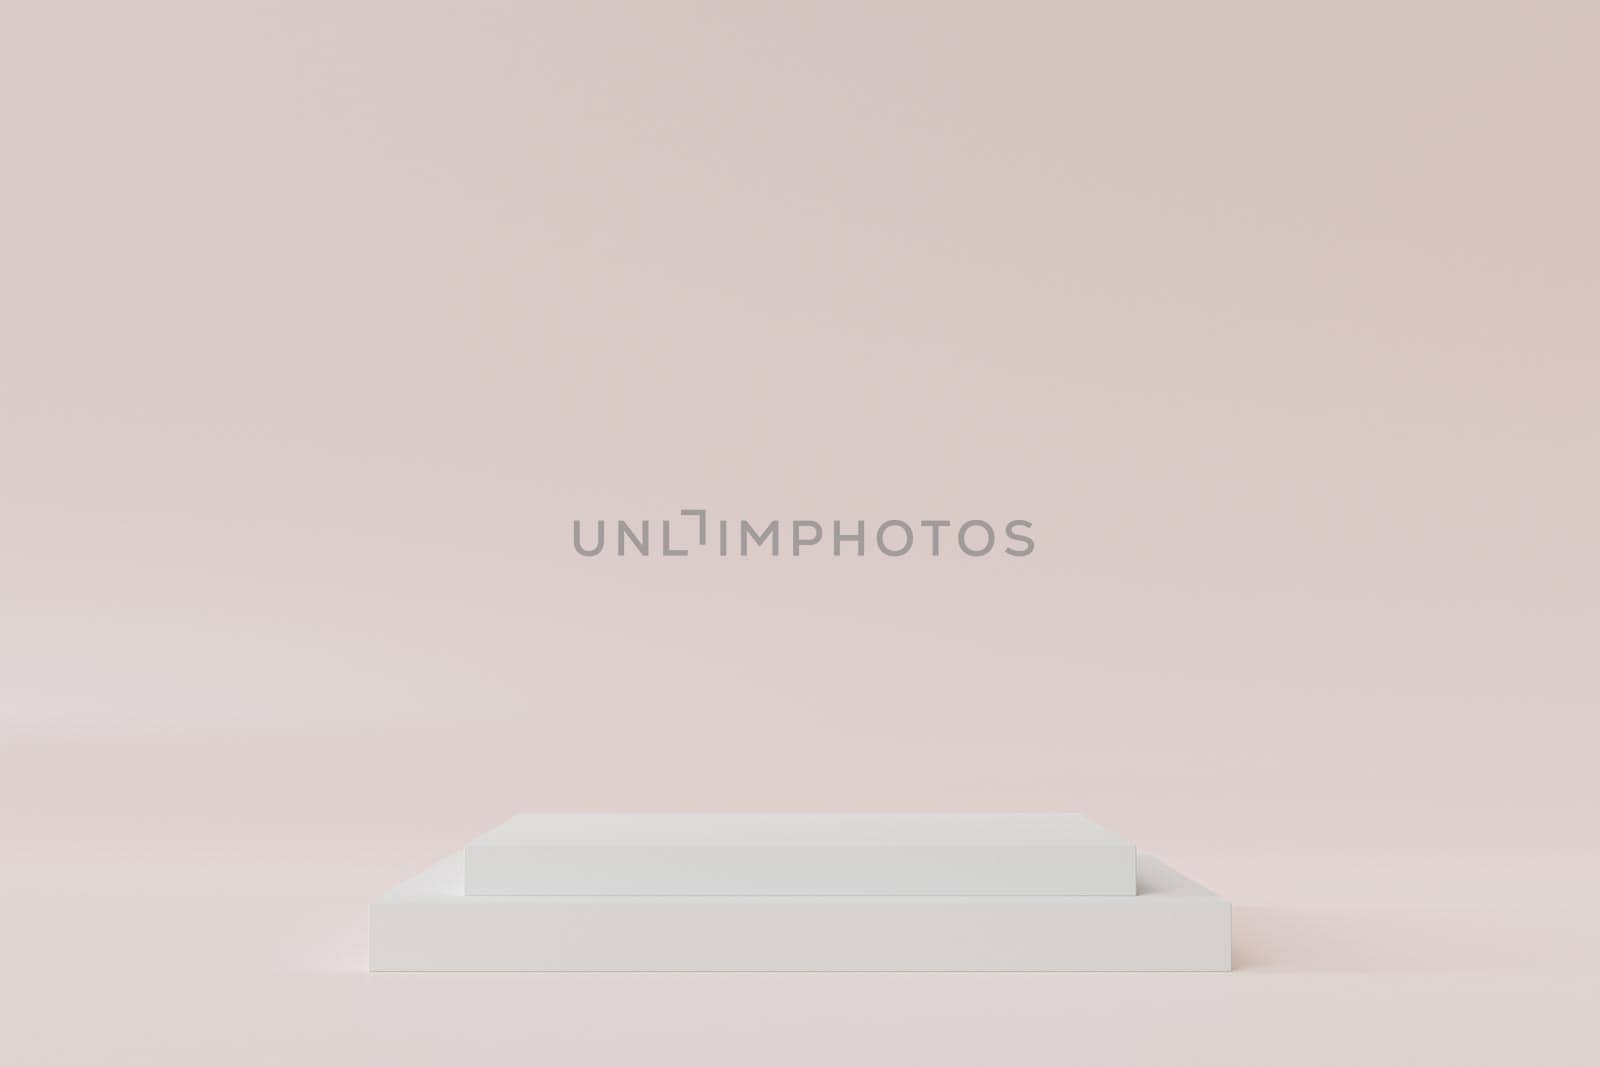 Square podium or pedestal for products or advertising on beige background, minimal 3d illustration render by Frostroomhead